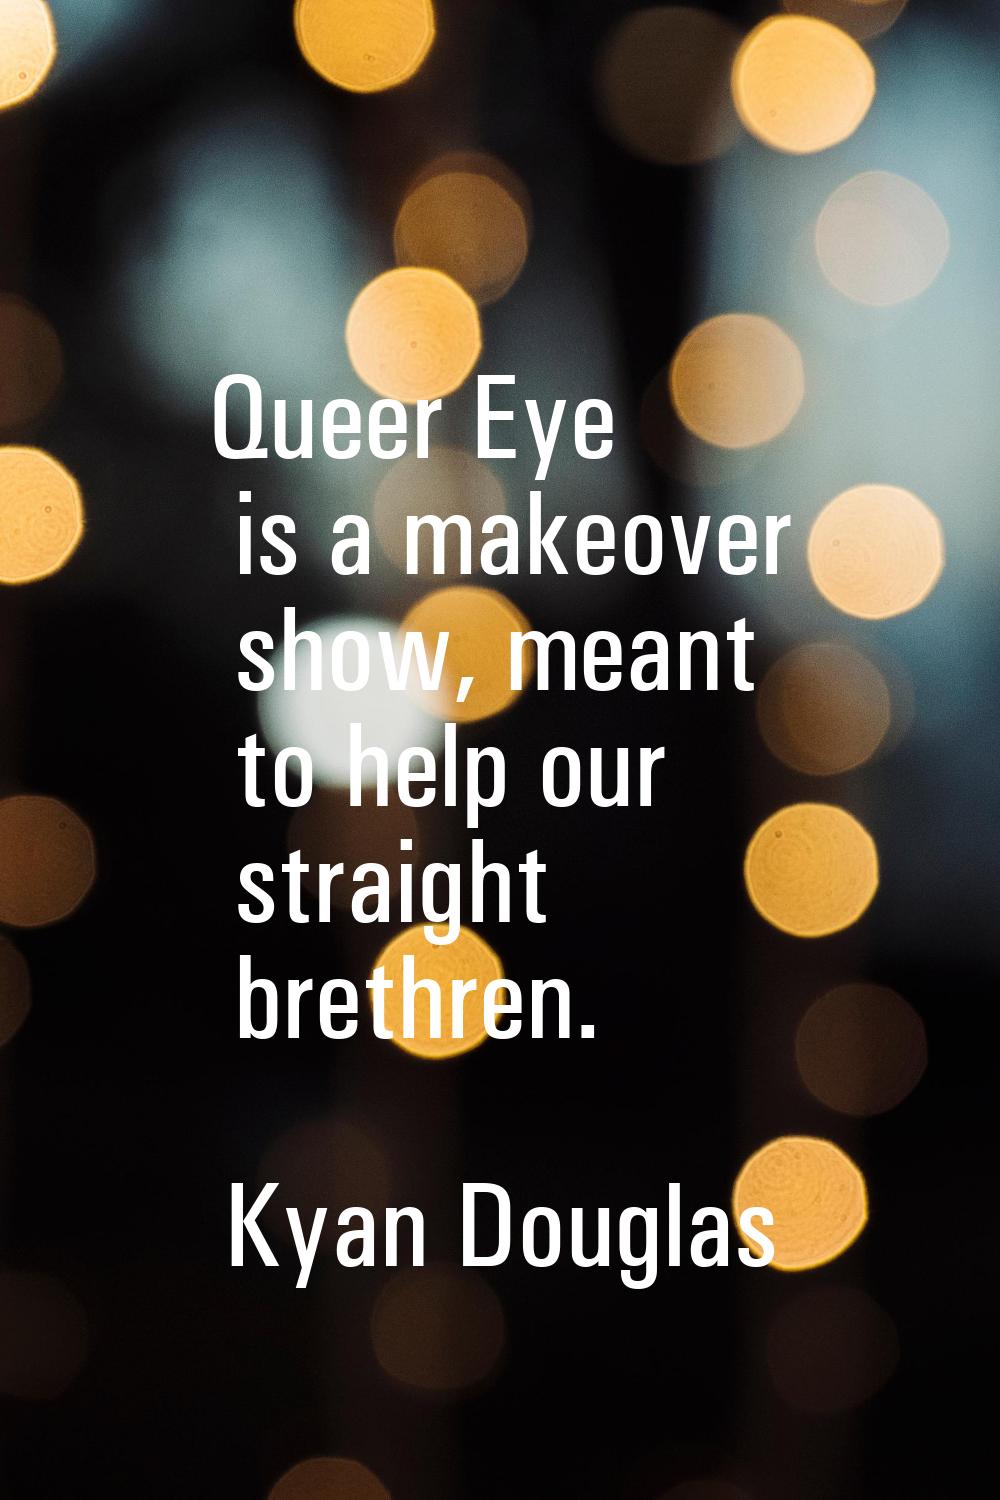 Queer Eye is a makeover show, meant to help our straight brethren.